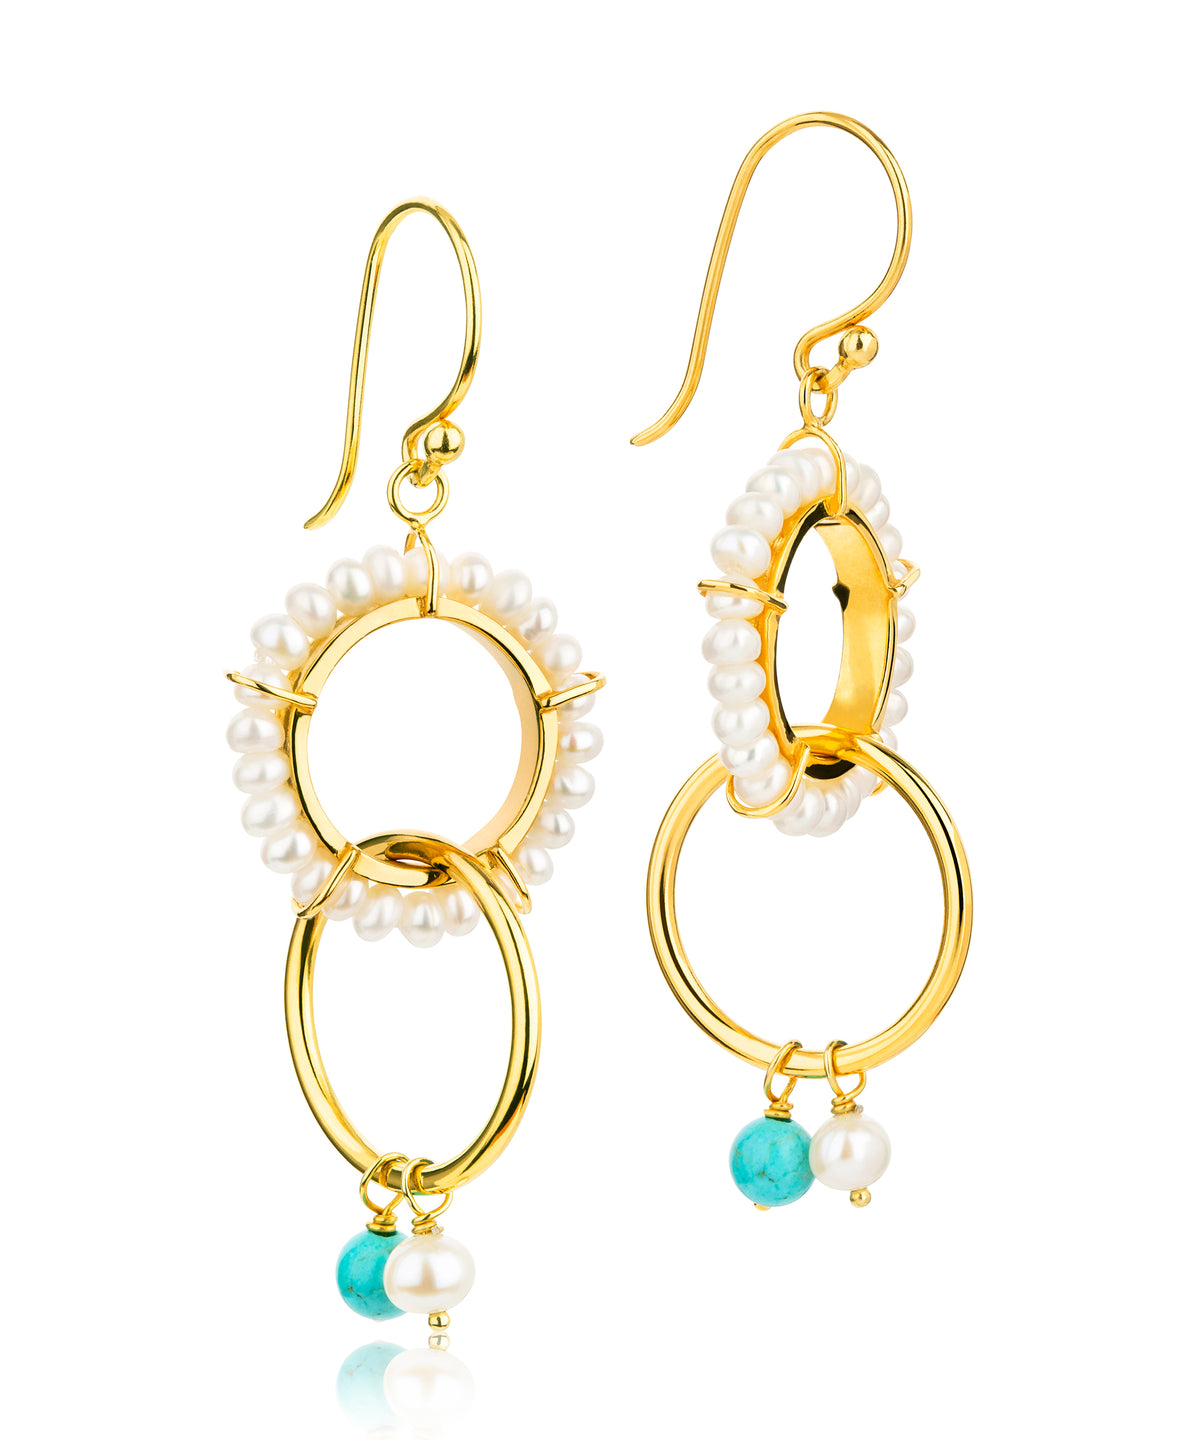 Double hoop earring with pearl and turquoise details